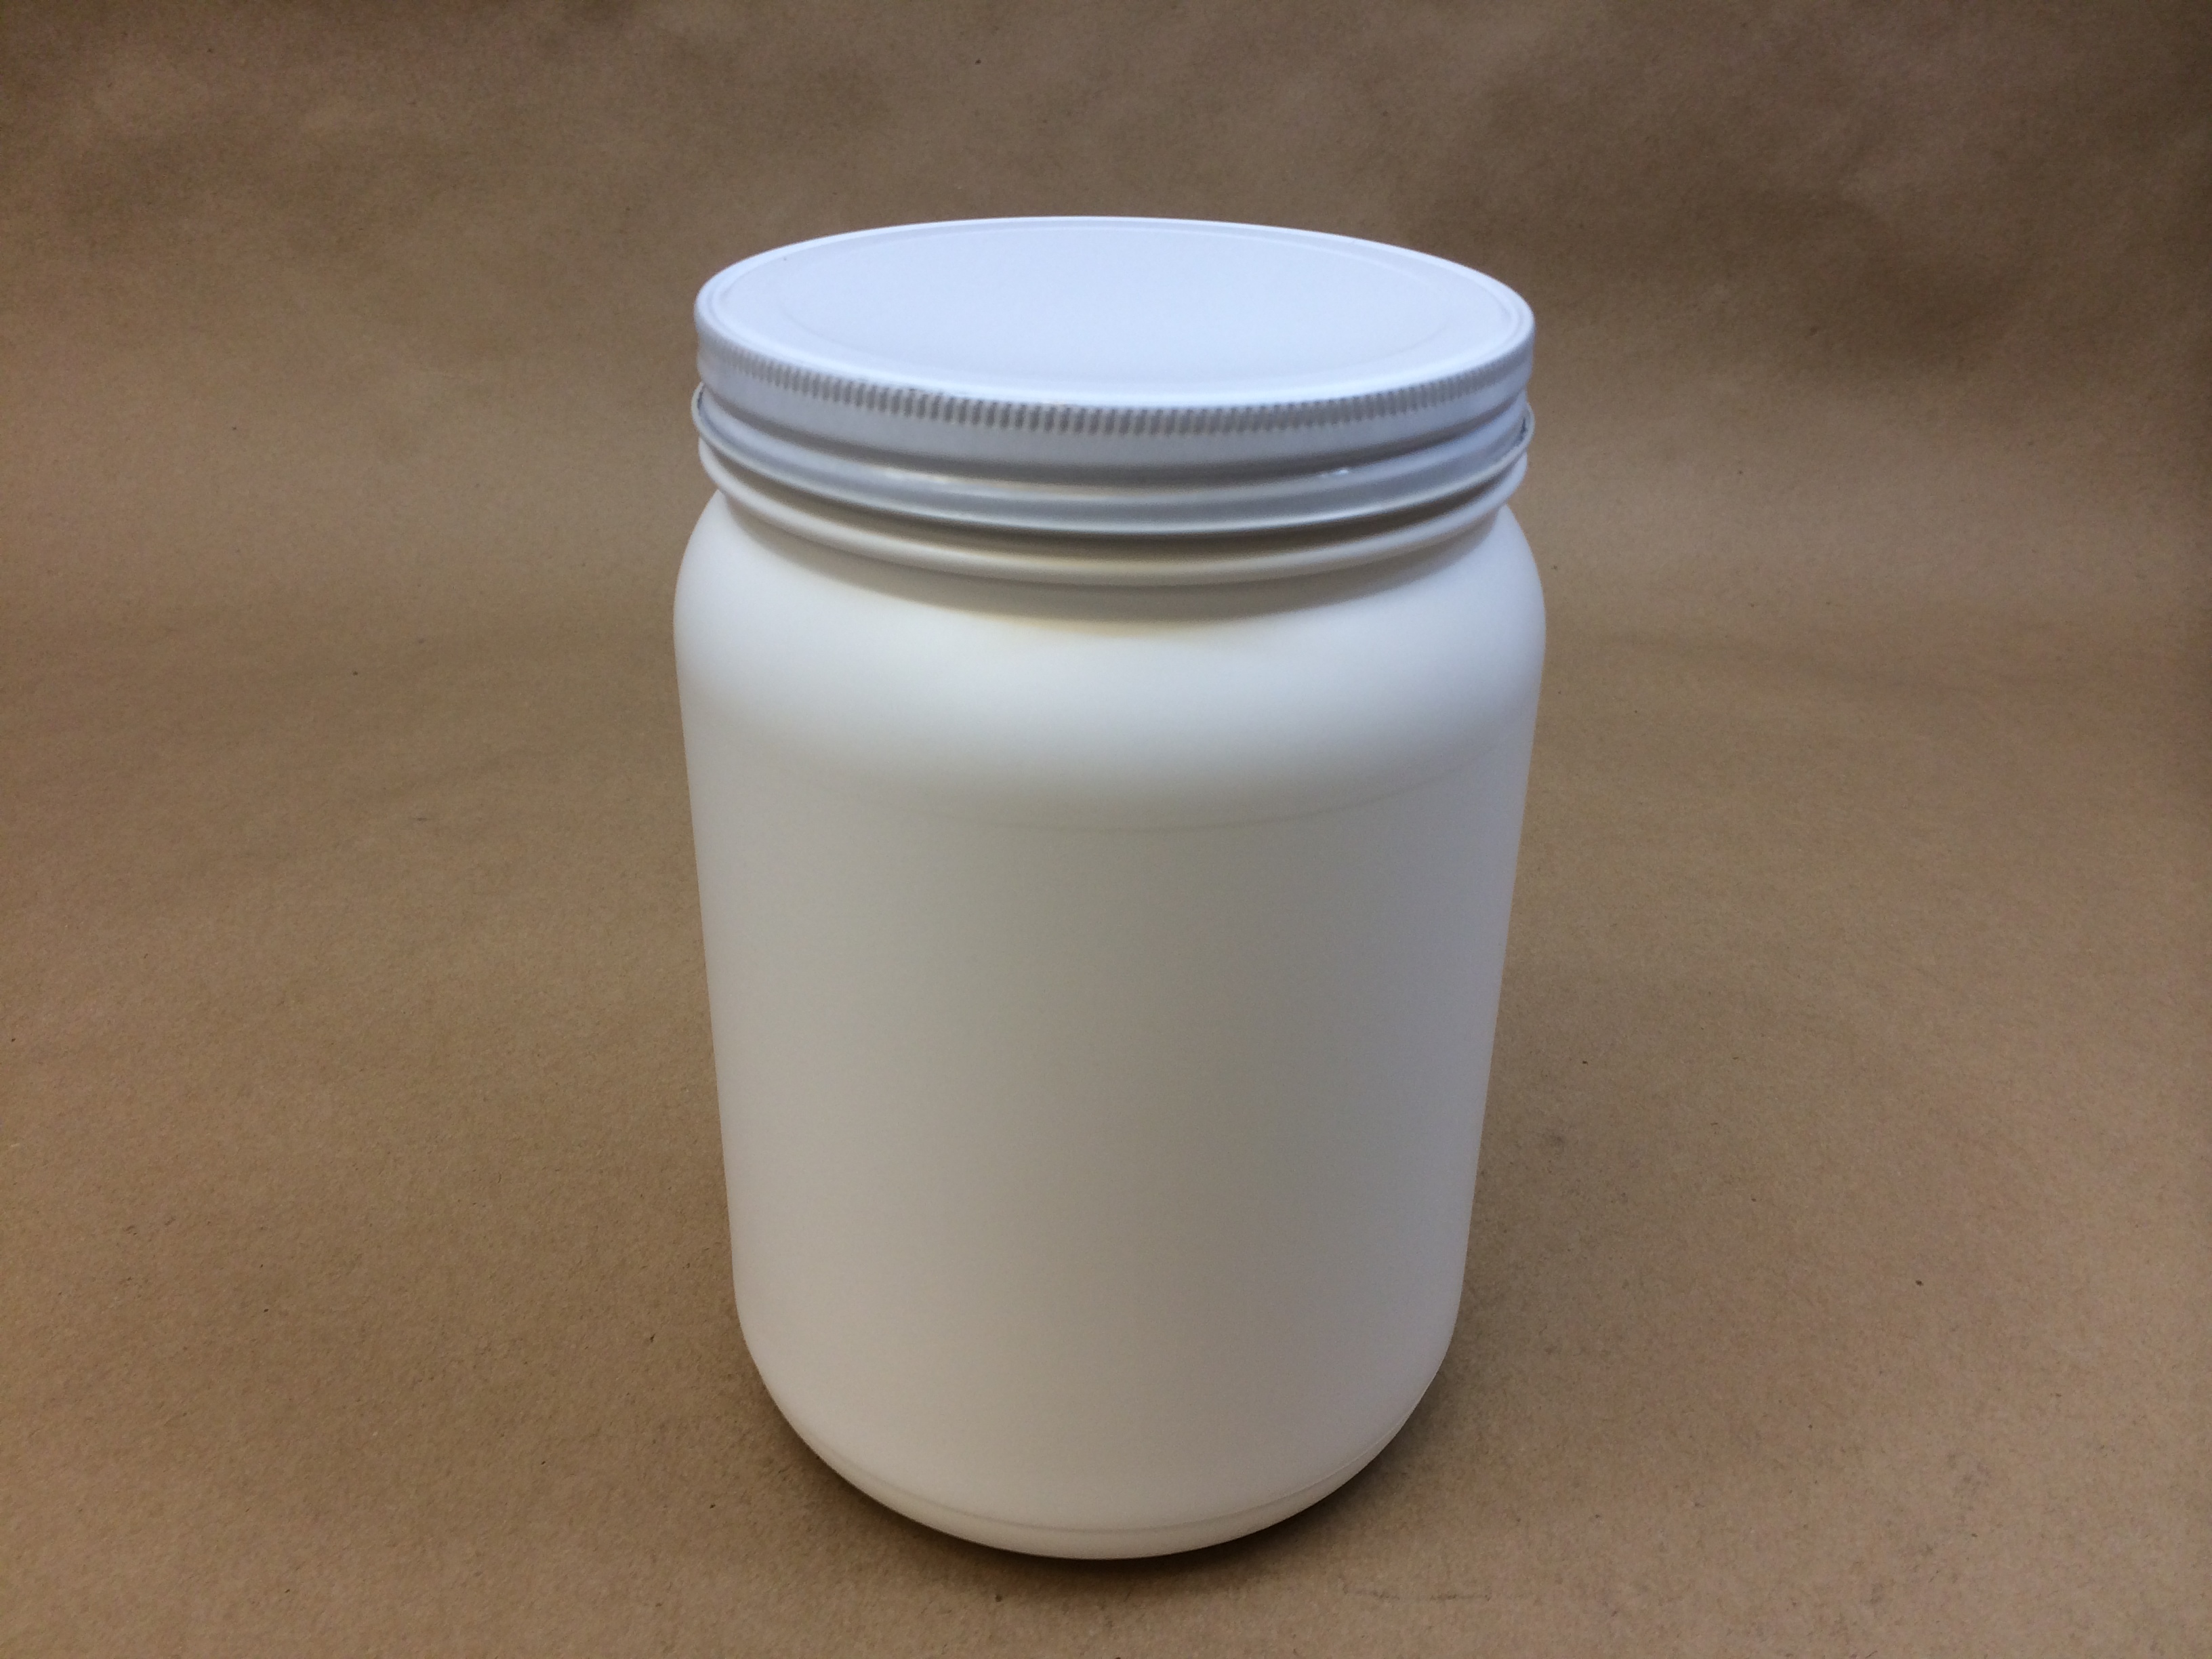 https://www.yankeecontainers.com/c/wp-content/uploads/2014/07/3-Pint-white-plastic-jar-with-metal-110mm-cap.jpg